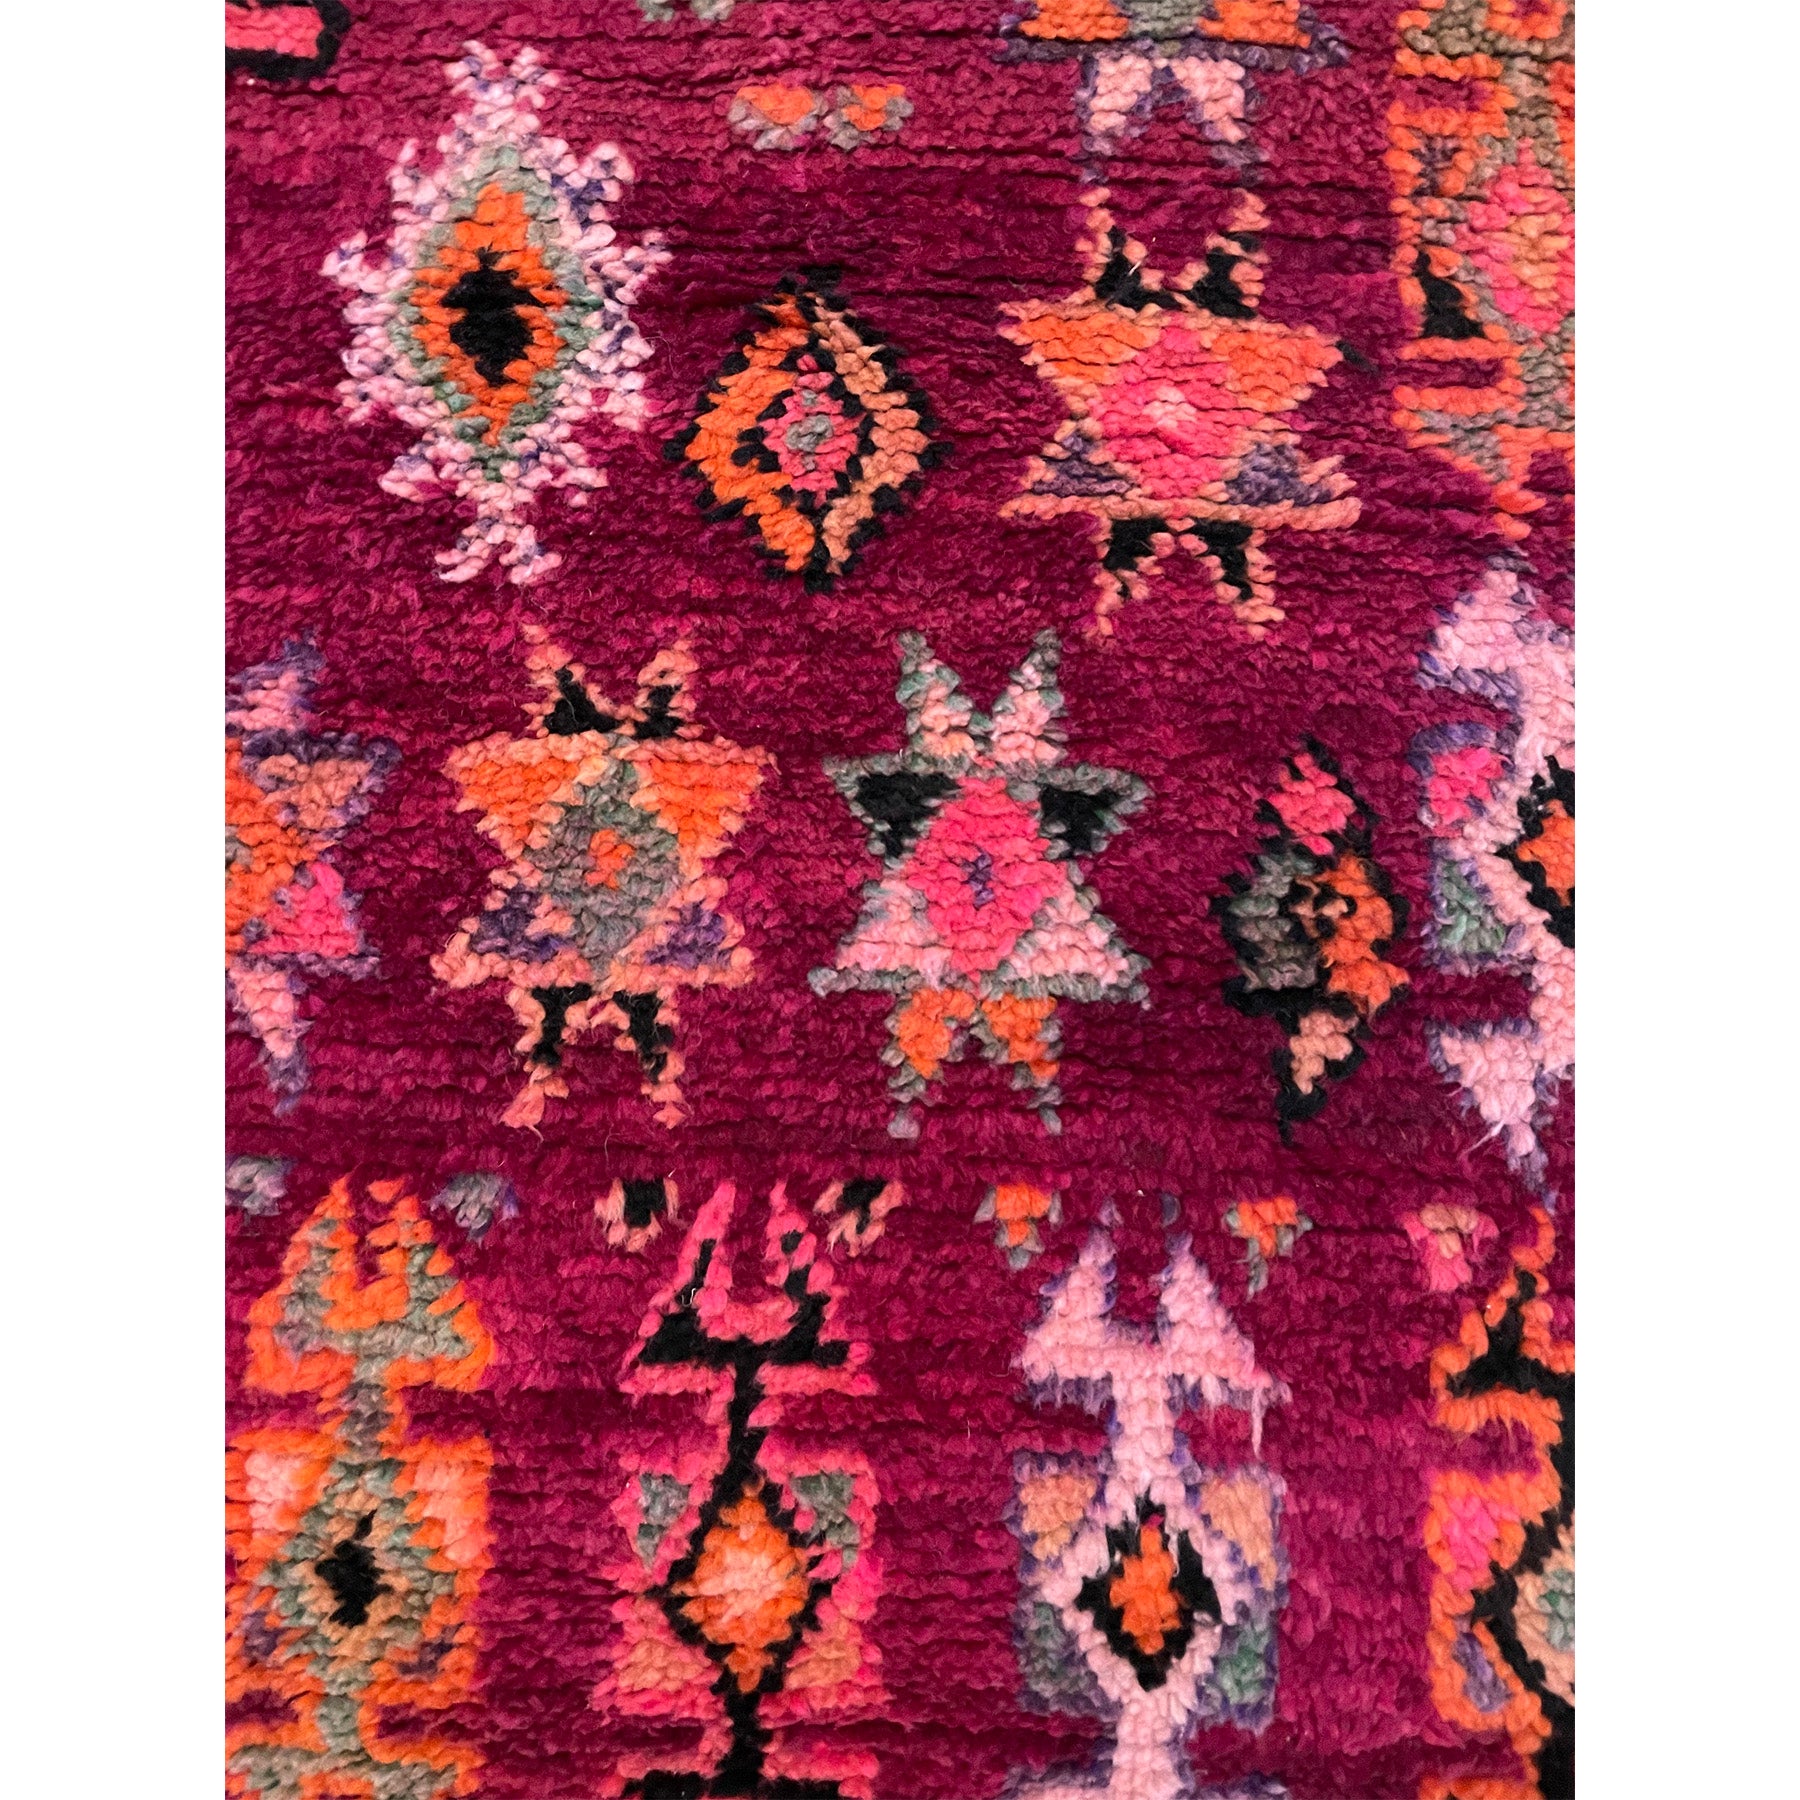 Colorful Moroccan berber area rug in shades of pink, purple, and orange - Kantara | Moroccan Rugs